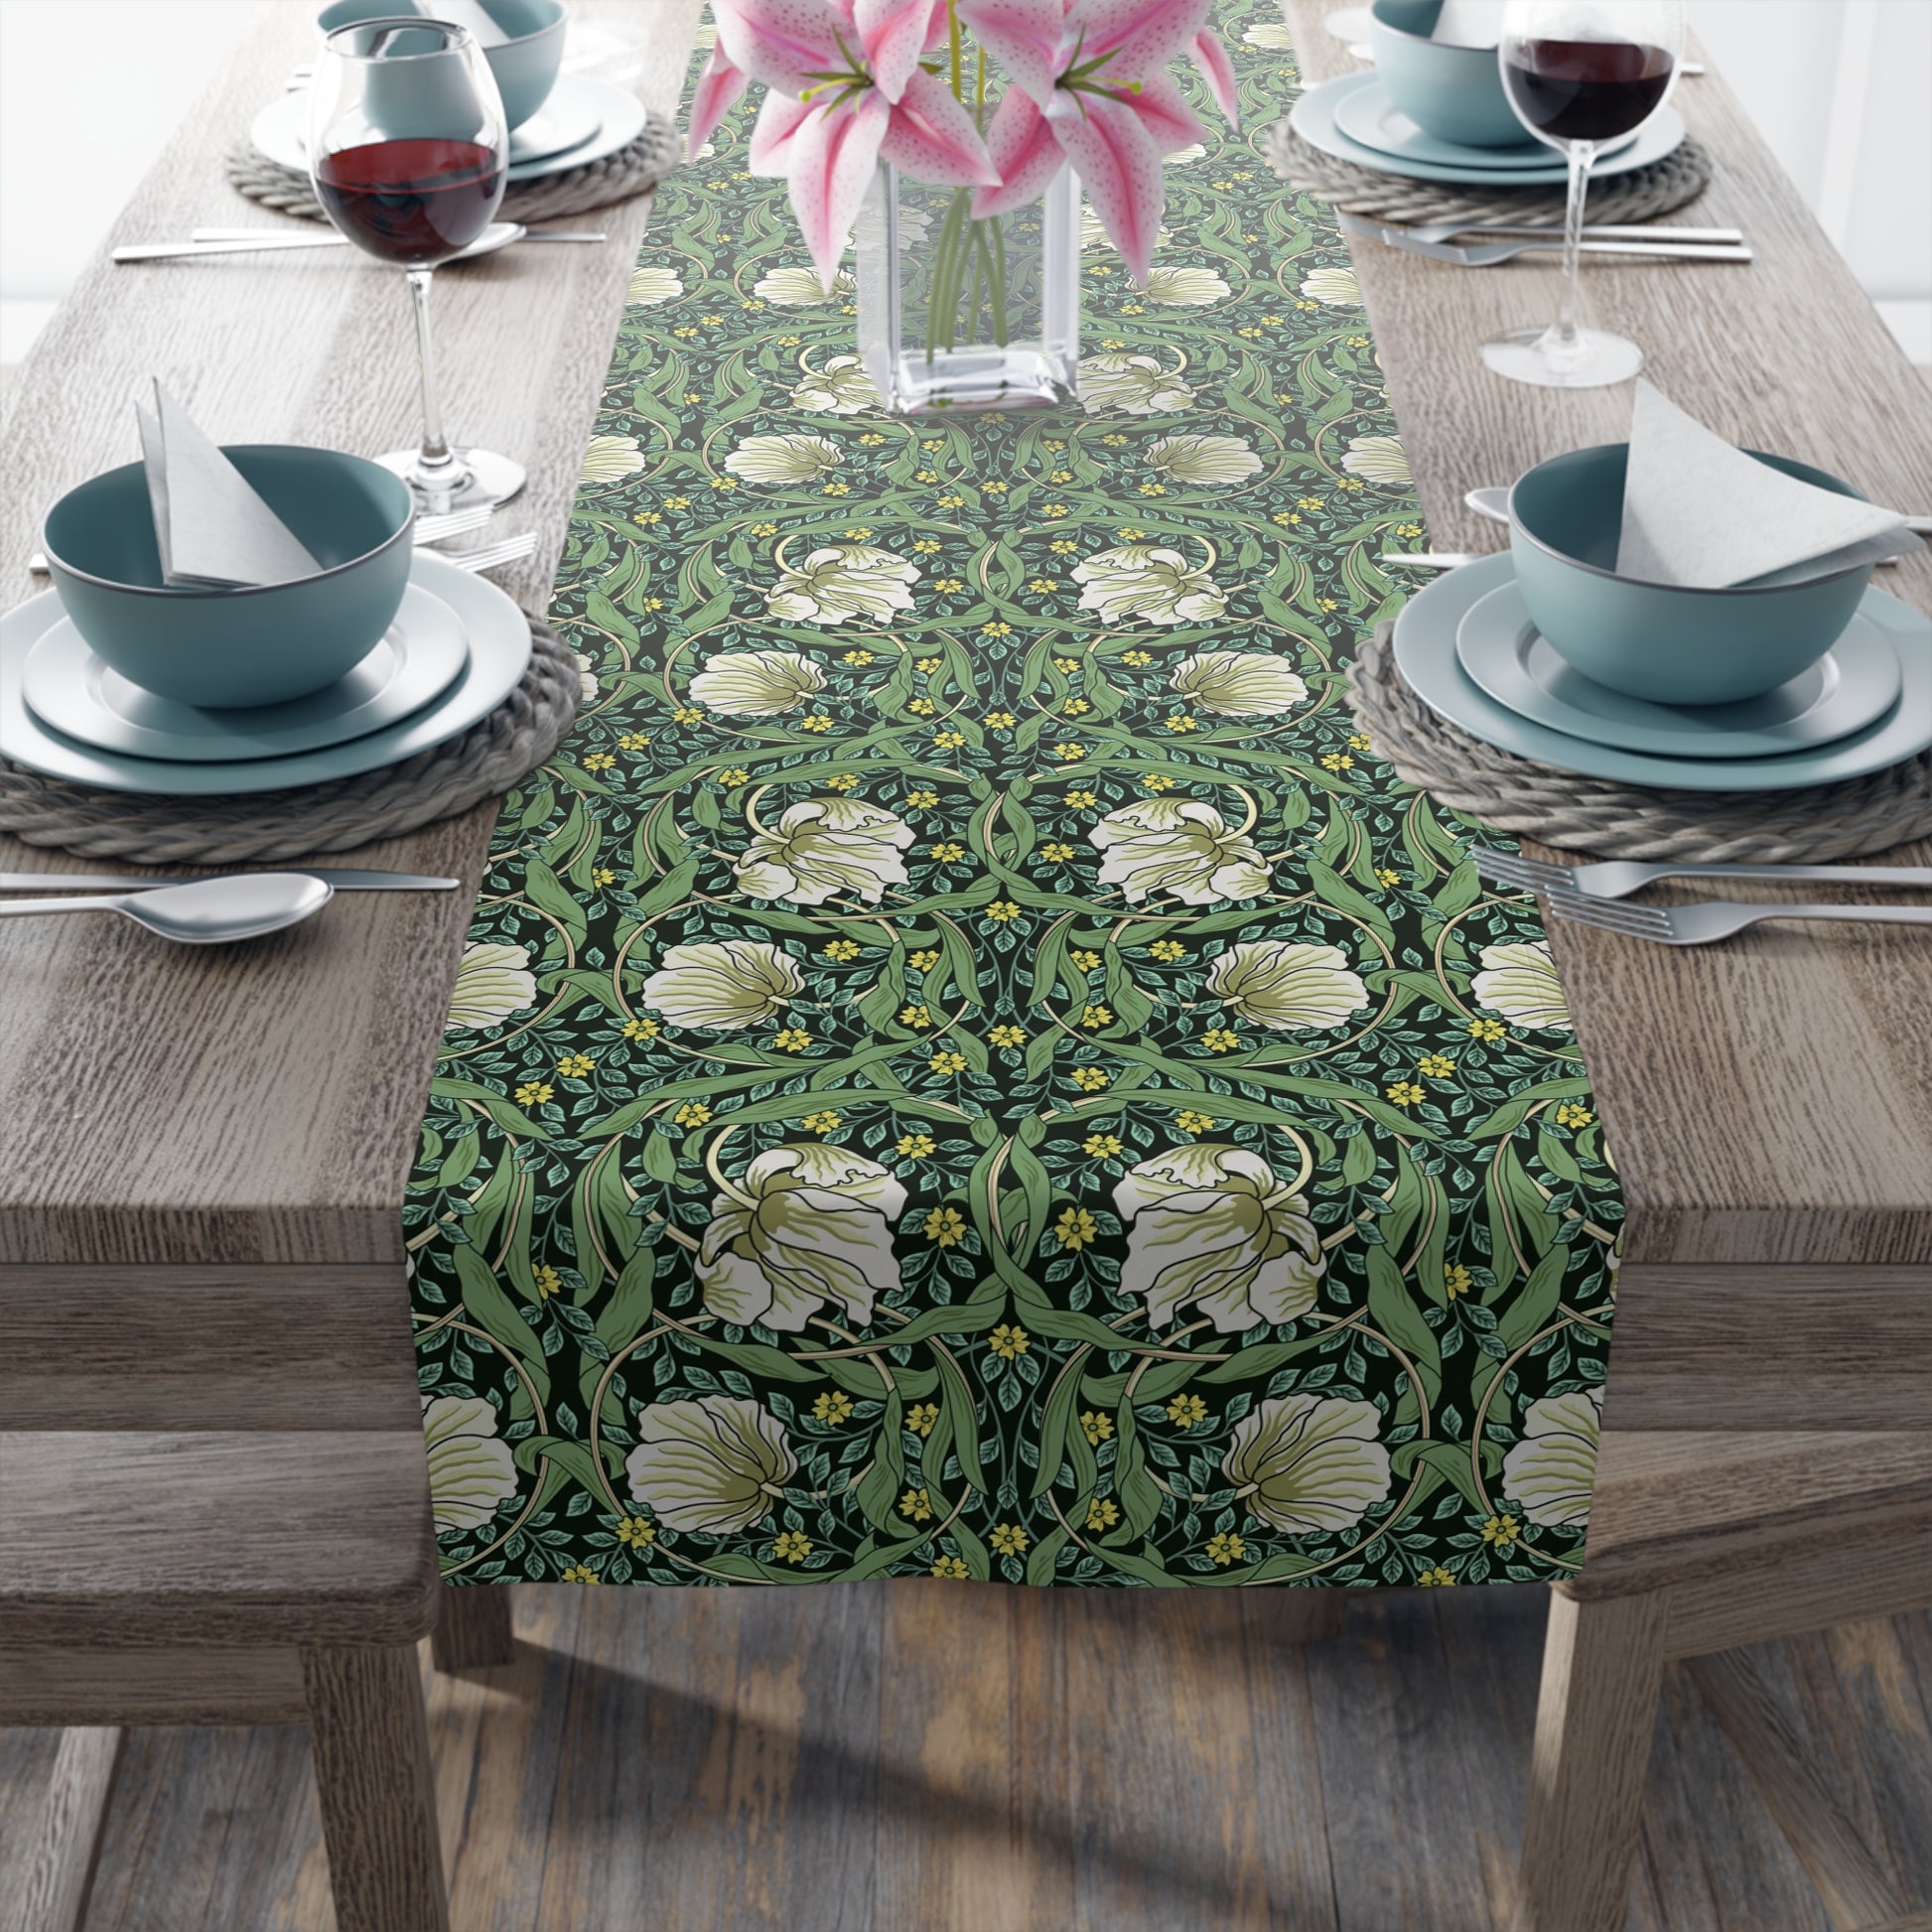 william-morris-co-table-runner-pimpernel-collection-green-9